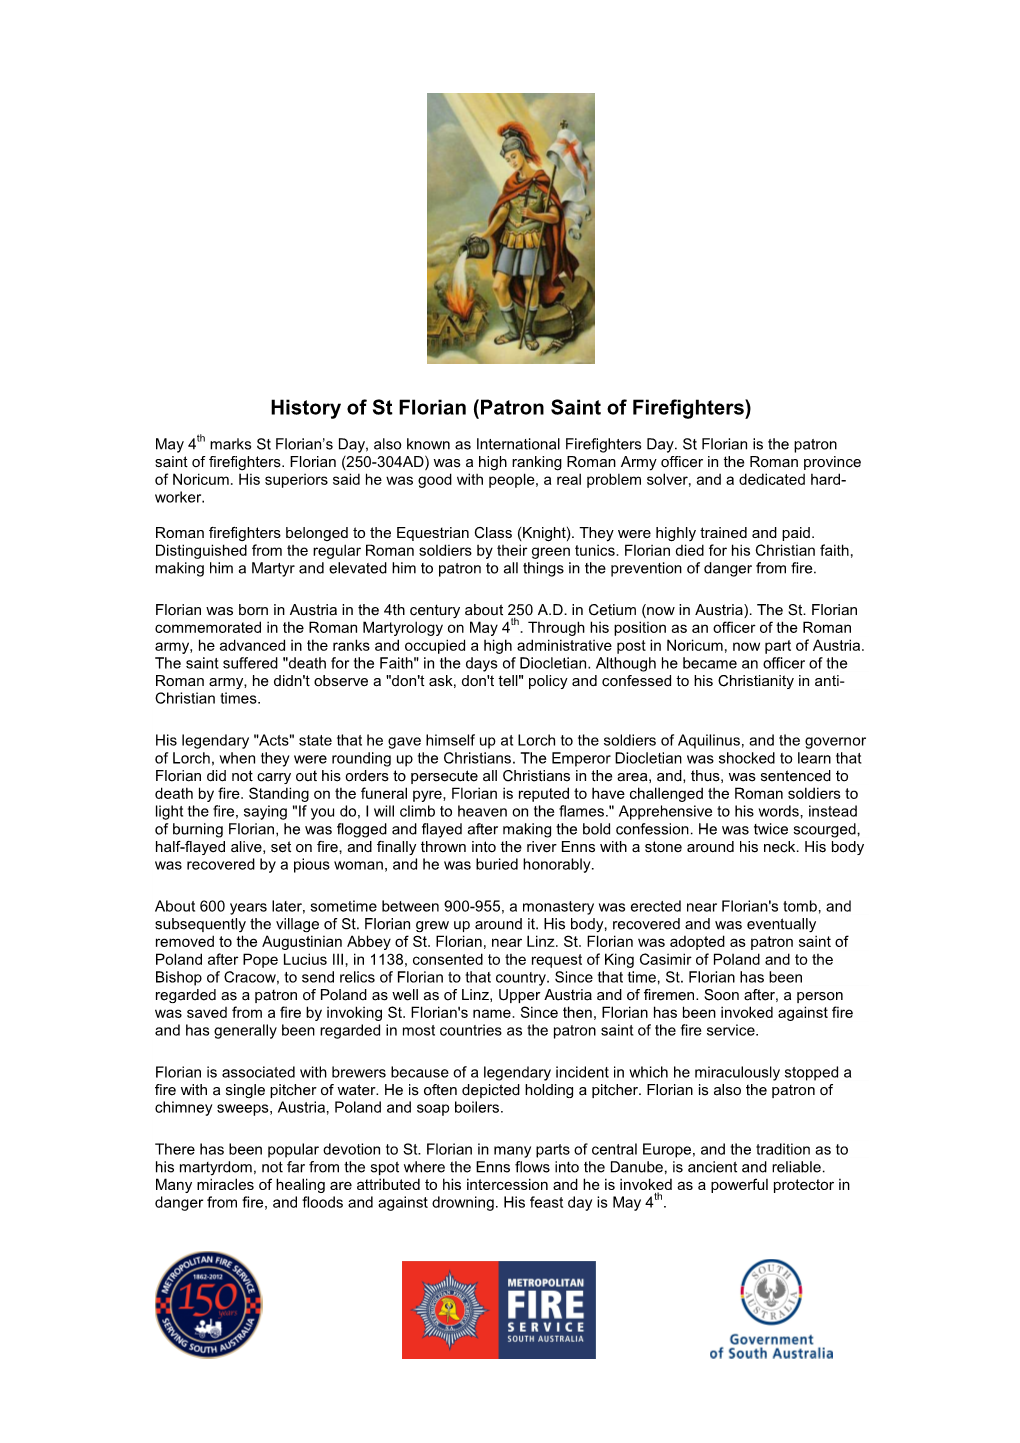 History of St Florian (Patron Saint of Firefighters)